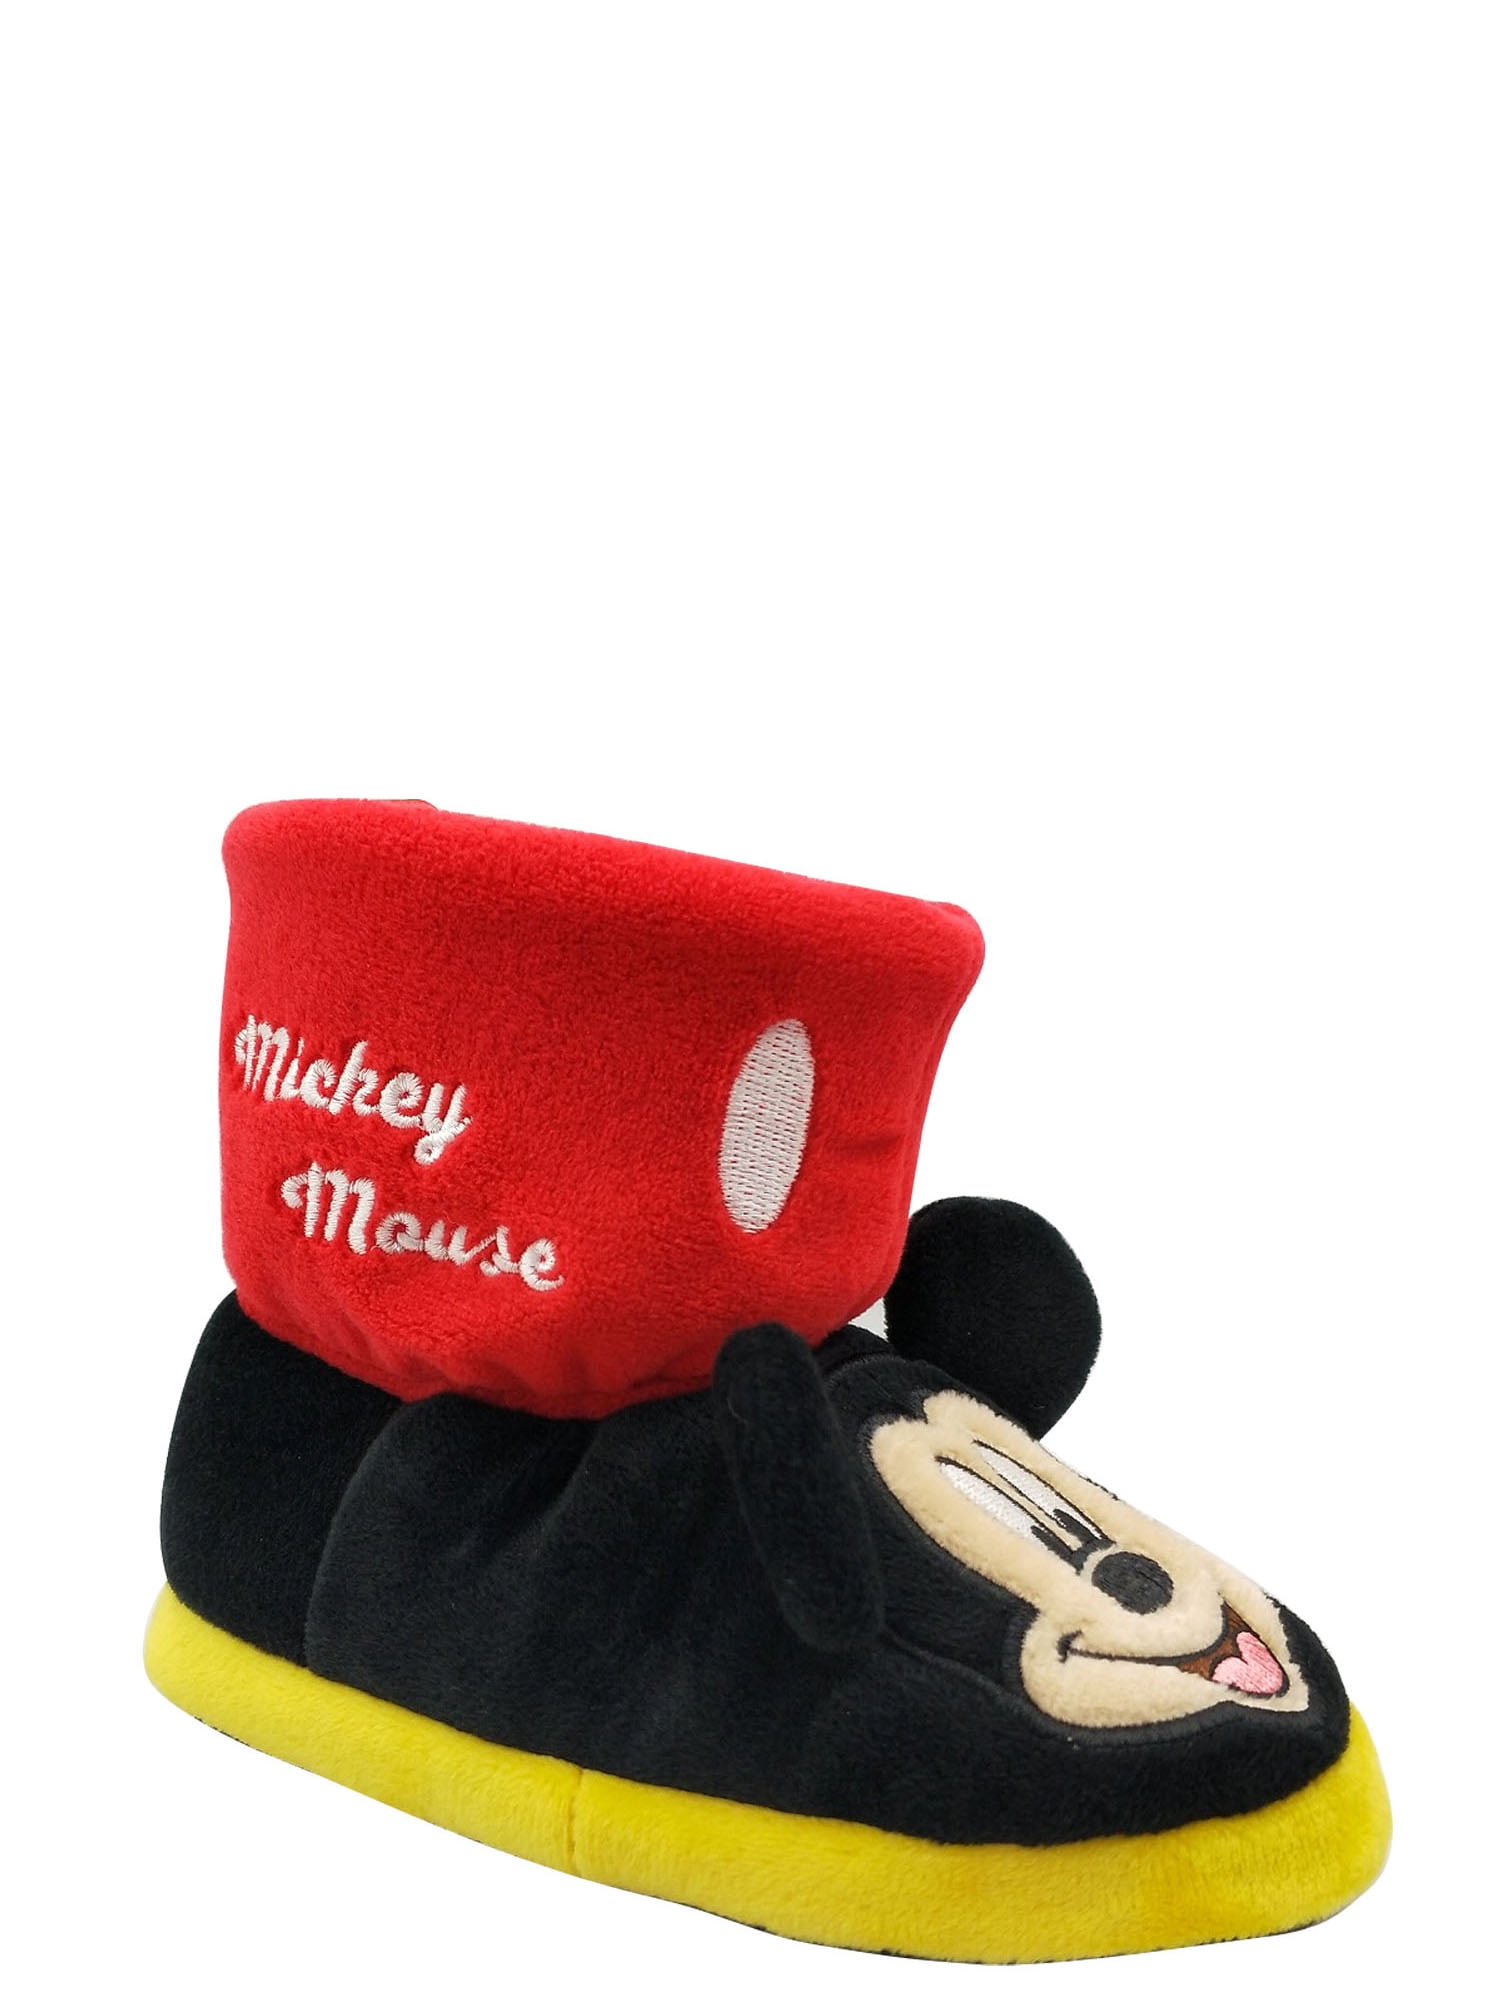 mickey mouse slippers walmart